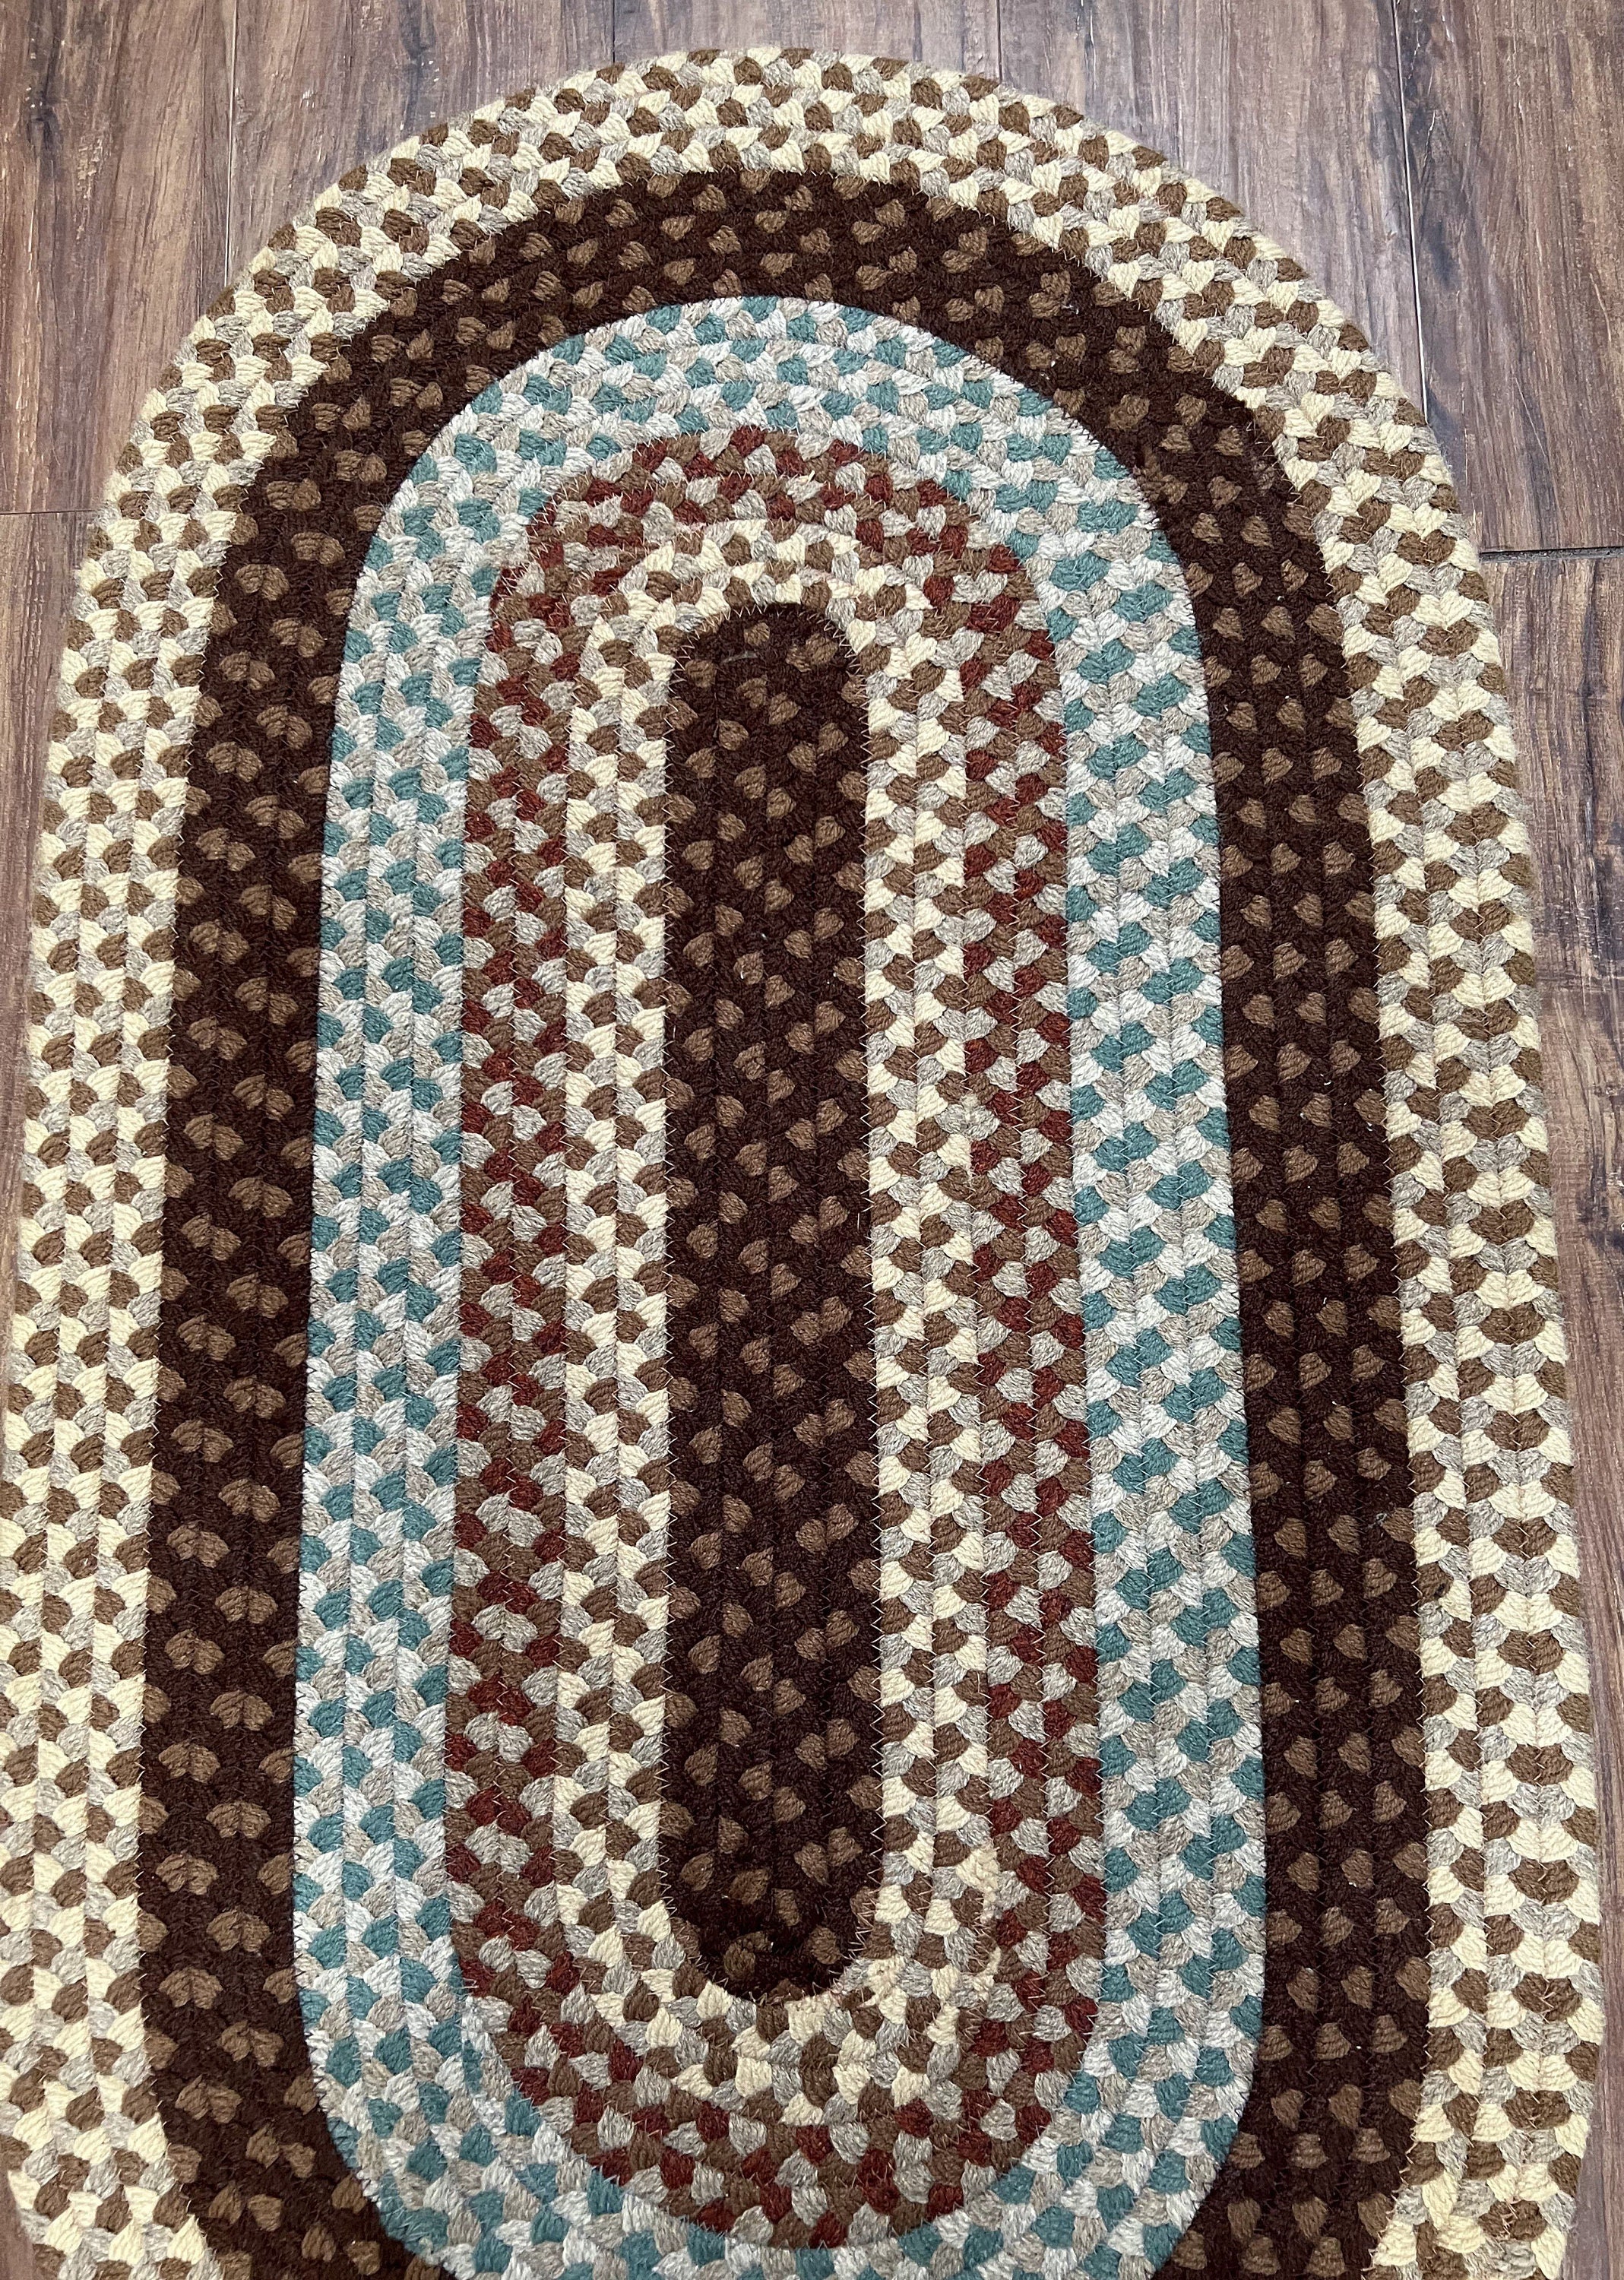 American Braided Rug 2x4 Ft Oval Rug, Multicolor Oval Rug, Oval Braided Rug,  Hand Woven, Vintage Braided Rug, Small Braided Rug 